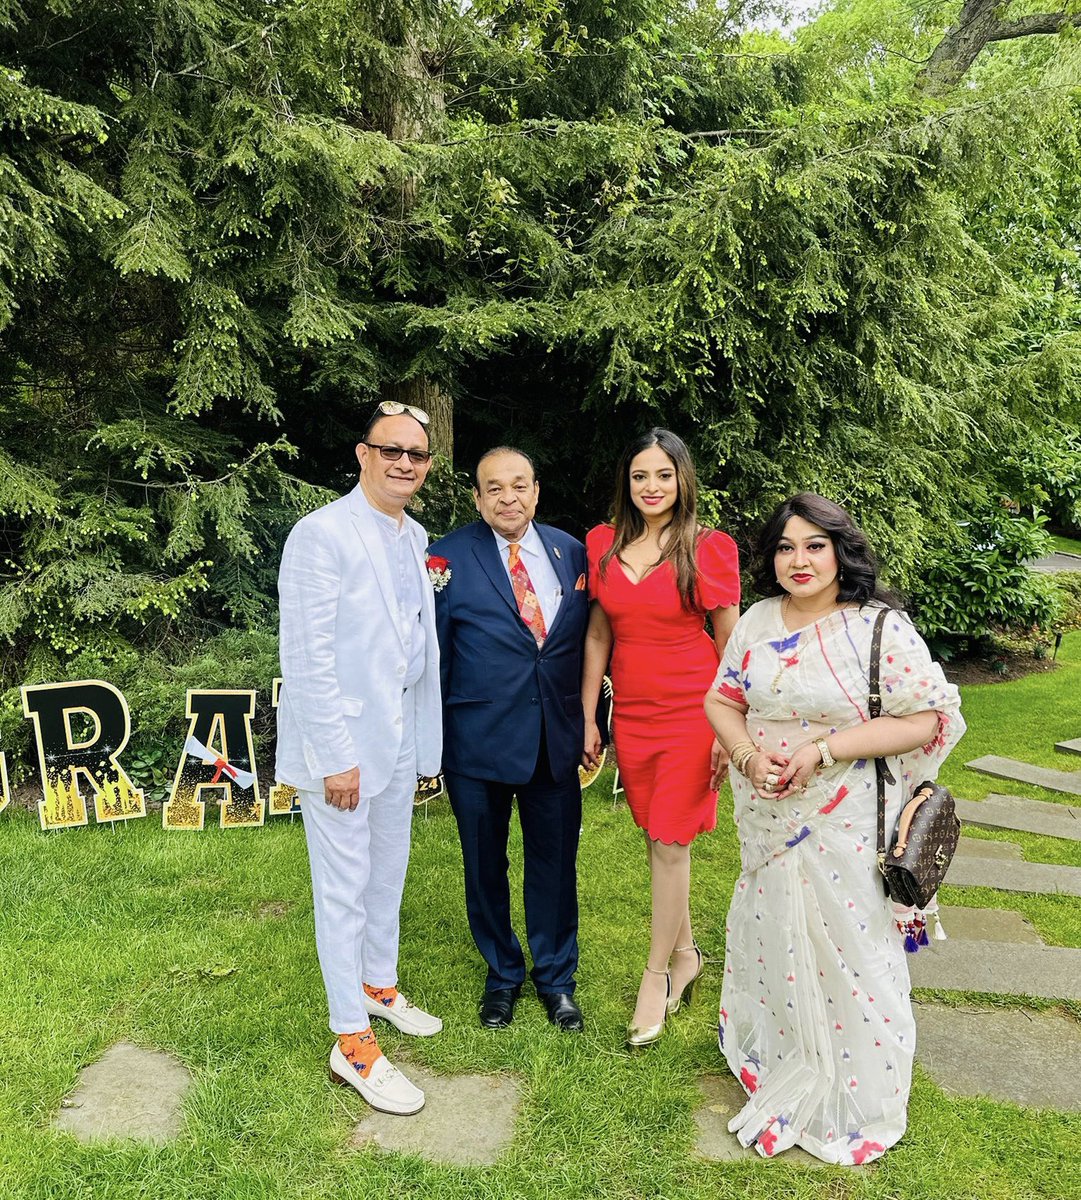 As the first South Asian-American woman elected to a NY State Office, I am proud to support the emerging talent in our community. This wknd, I celebrated Sabah Bari’s graduation & honored her with a NY State proclamation for her extraordinary leadership supporting women in STEM.